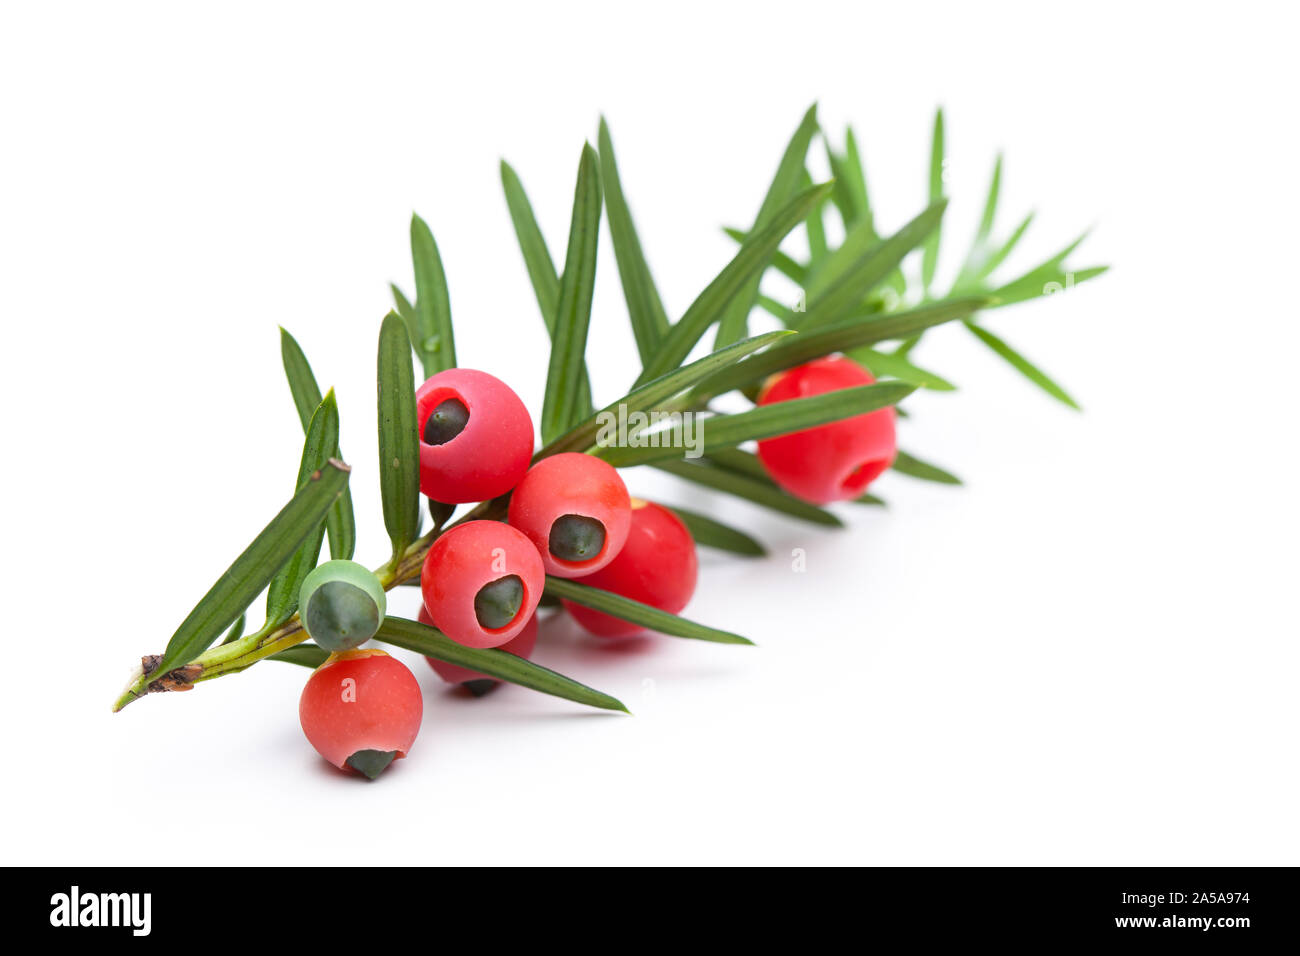 healing plants: Branch of a yew (Taxus baccata) with berries Stock Photo